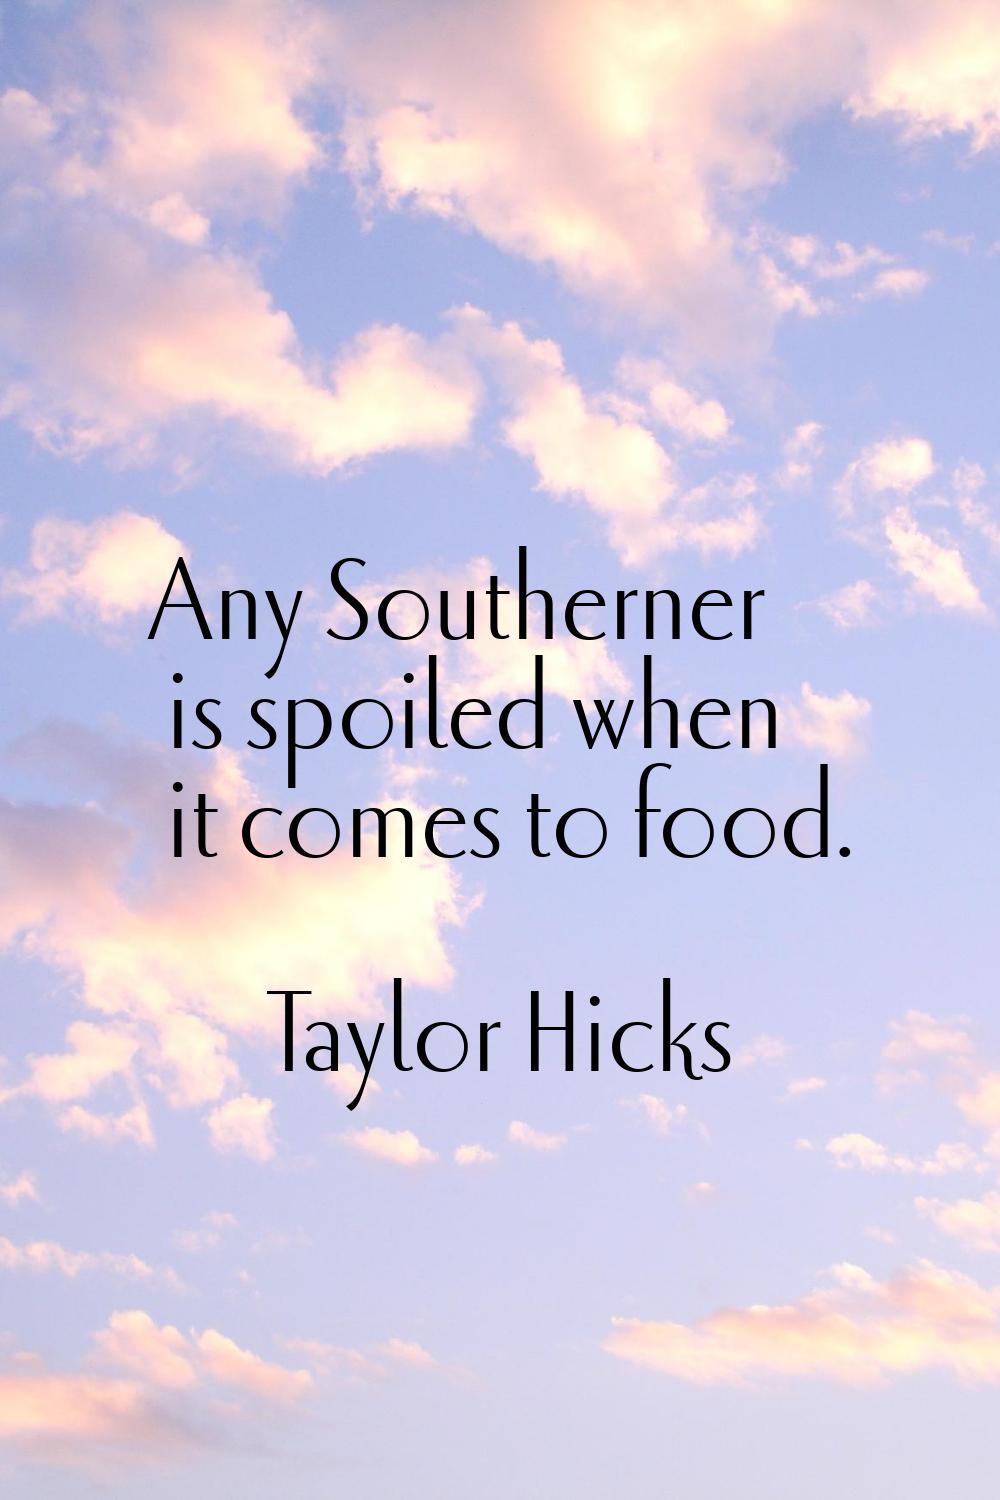 Any Southerner is spoiled when it comes to food.